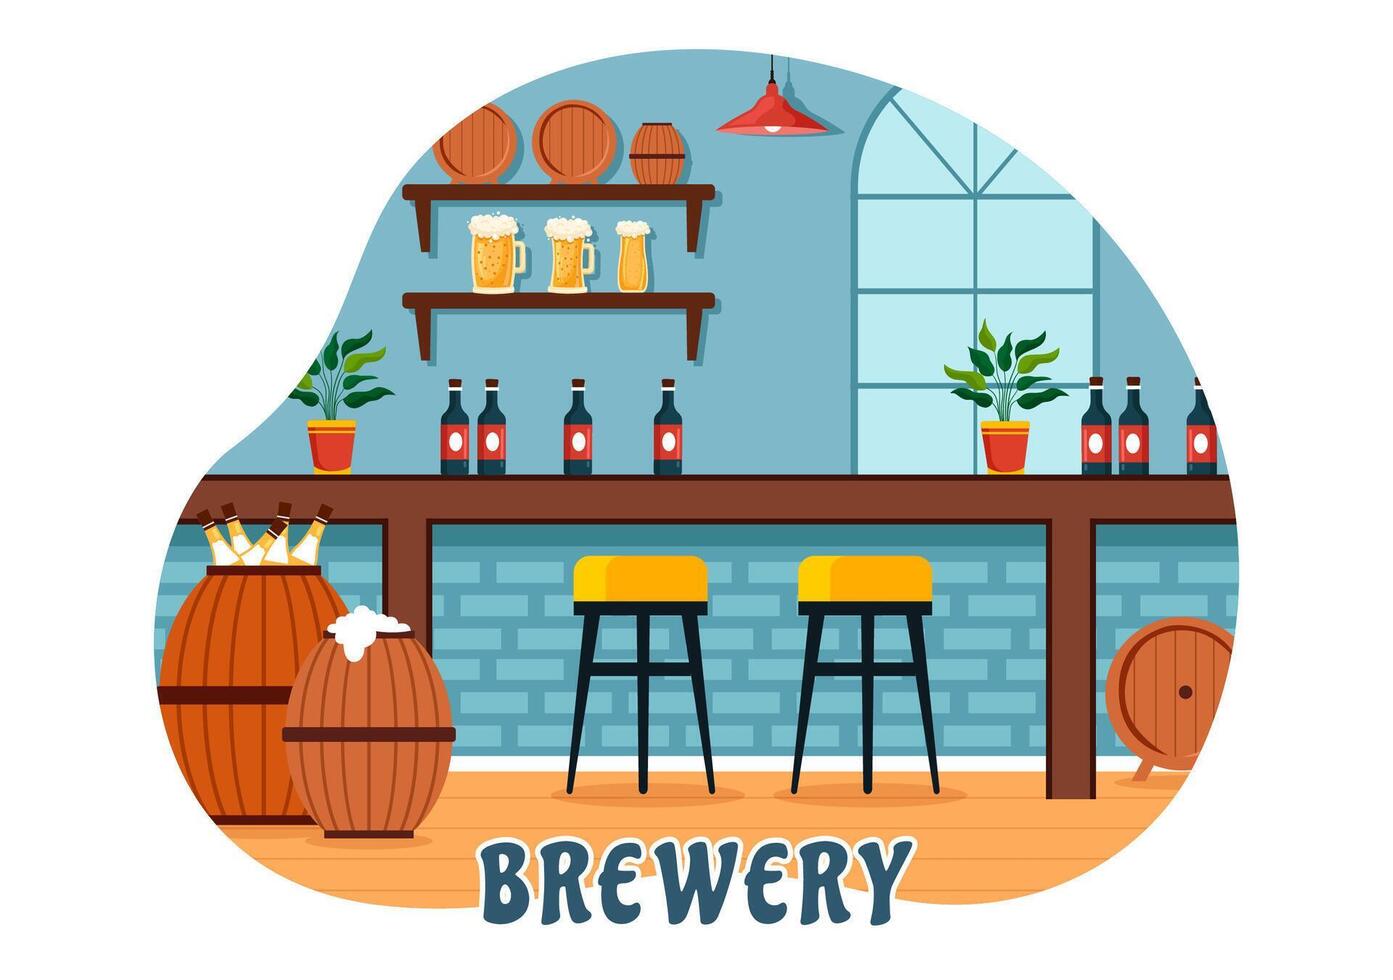 Brewery Production Process Illustration with Beer Tank and Bottle Full of Alcohol Drink for Fermentation in Flat Cartoon Background vector